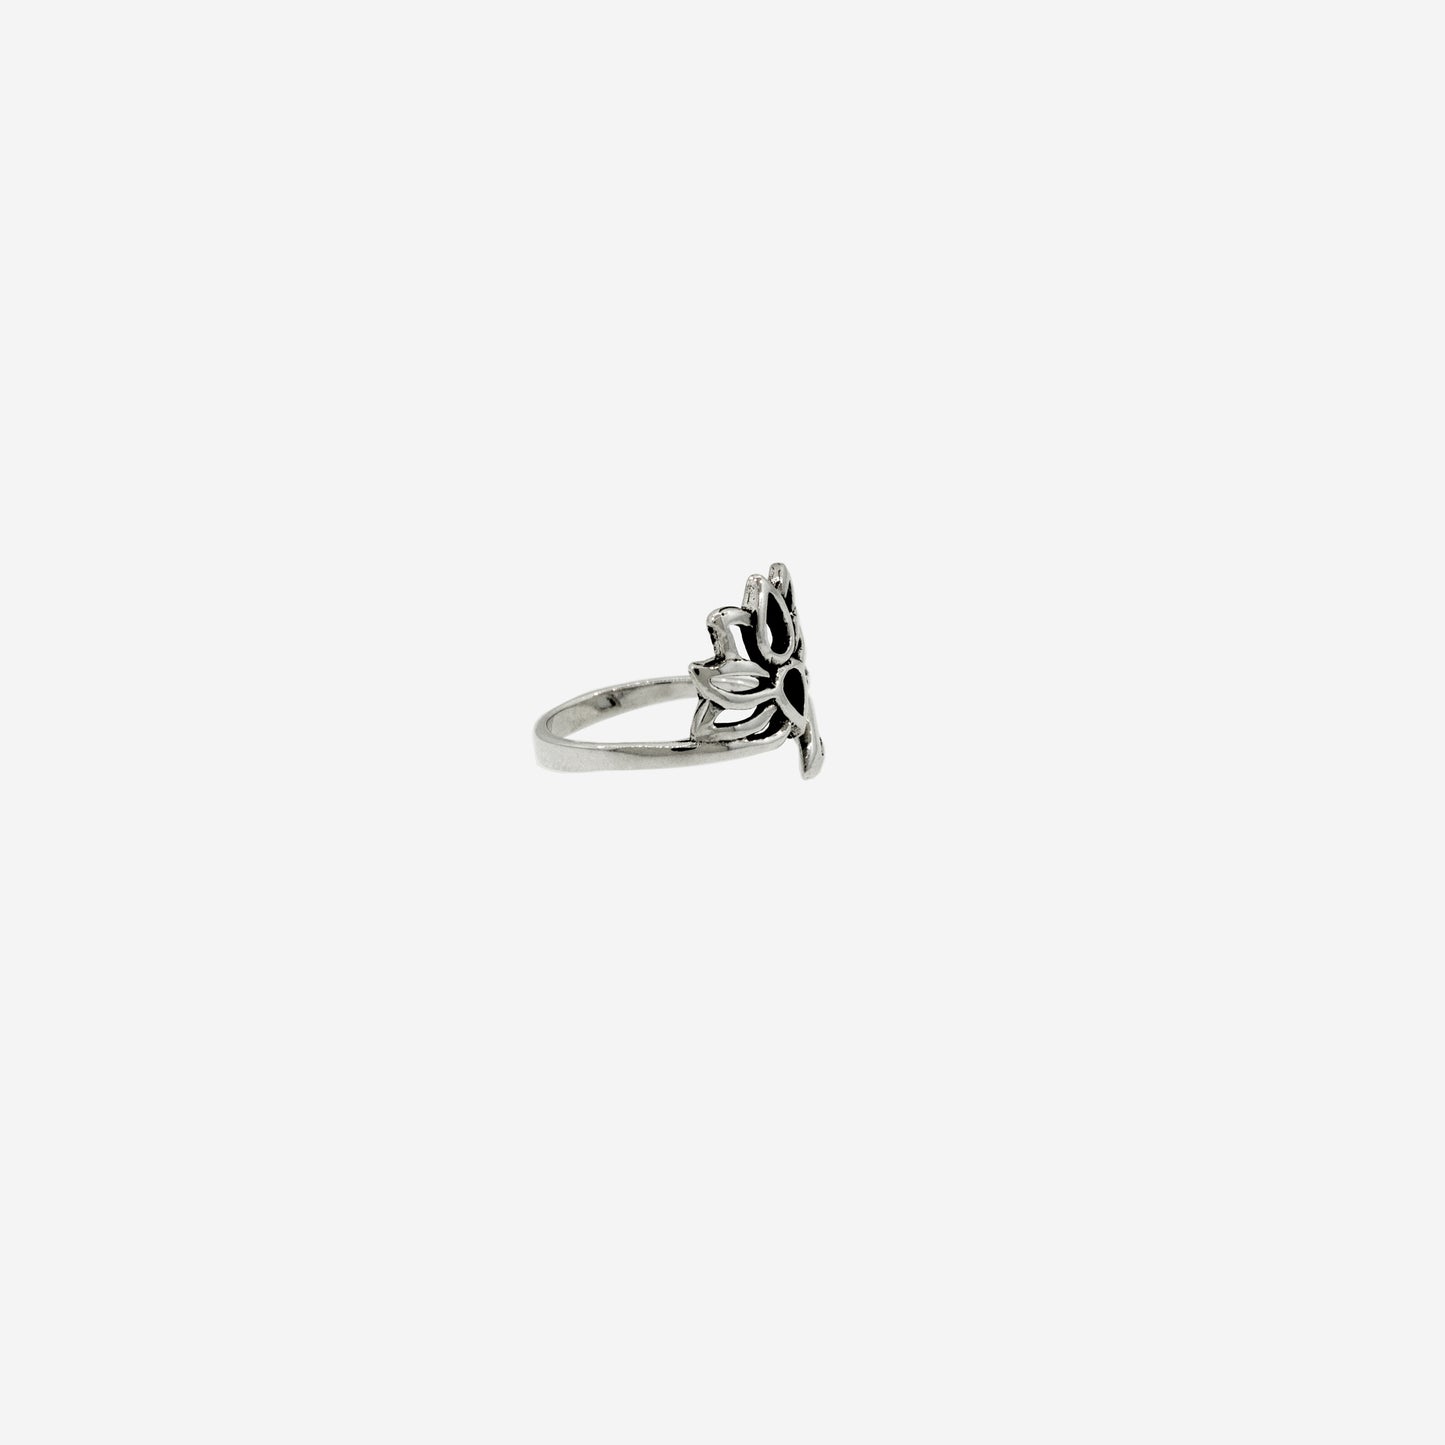 
                  
                    An adjustable Wrap Around Adjustable Lotus Flower Ring made of .925 sterling silver by Super Silver.
                  
                